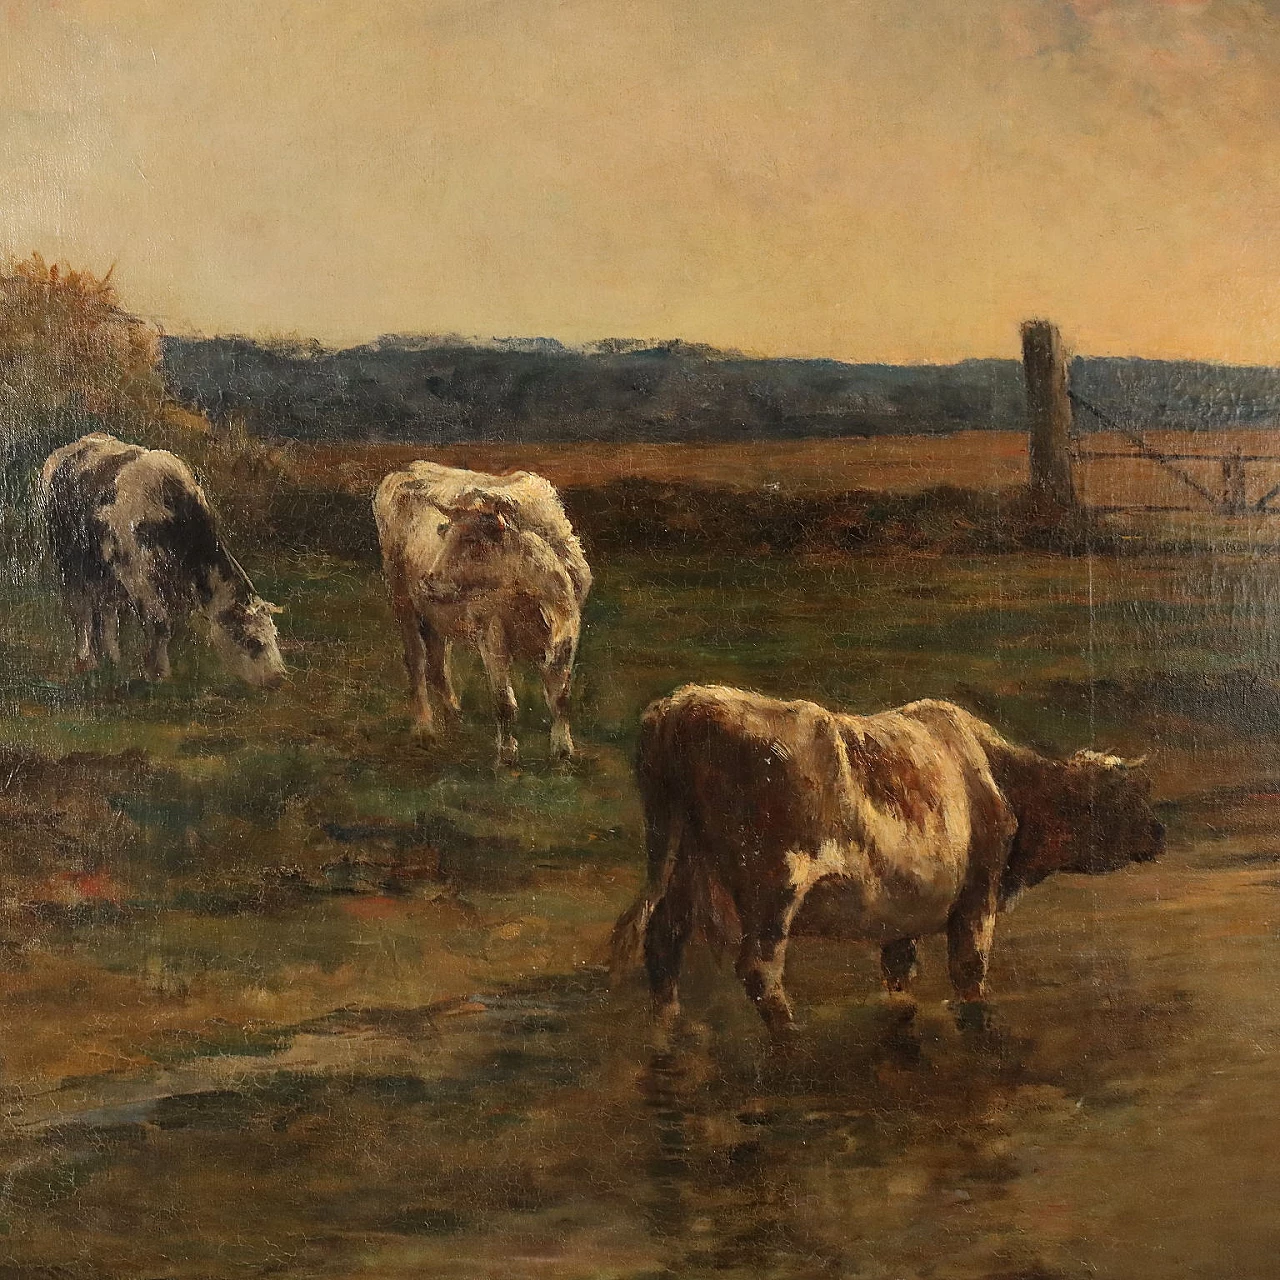 G. Pier Dieterle, Glimpse of countryside with cows, oil on canvas 3